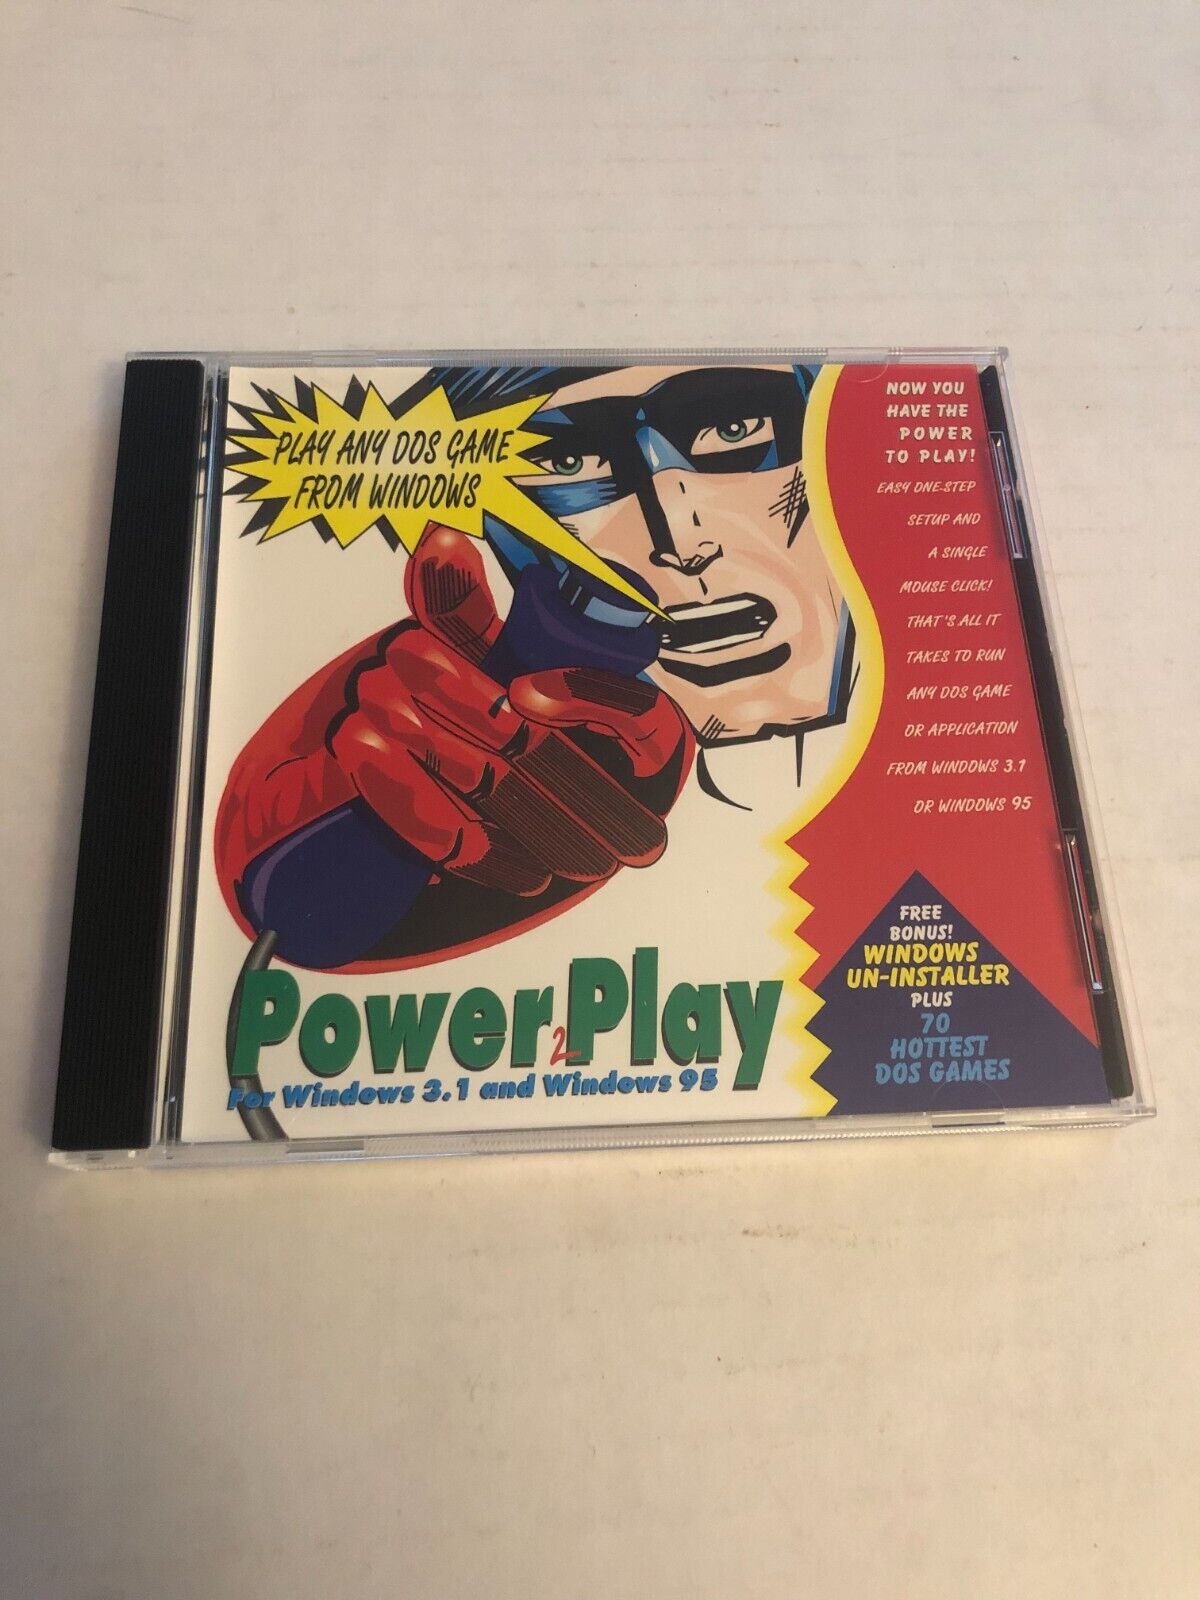 Power Play 2 for Windows 3.1 & 95 (Play Any DOS Game From Windows) PC CD-ROM